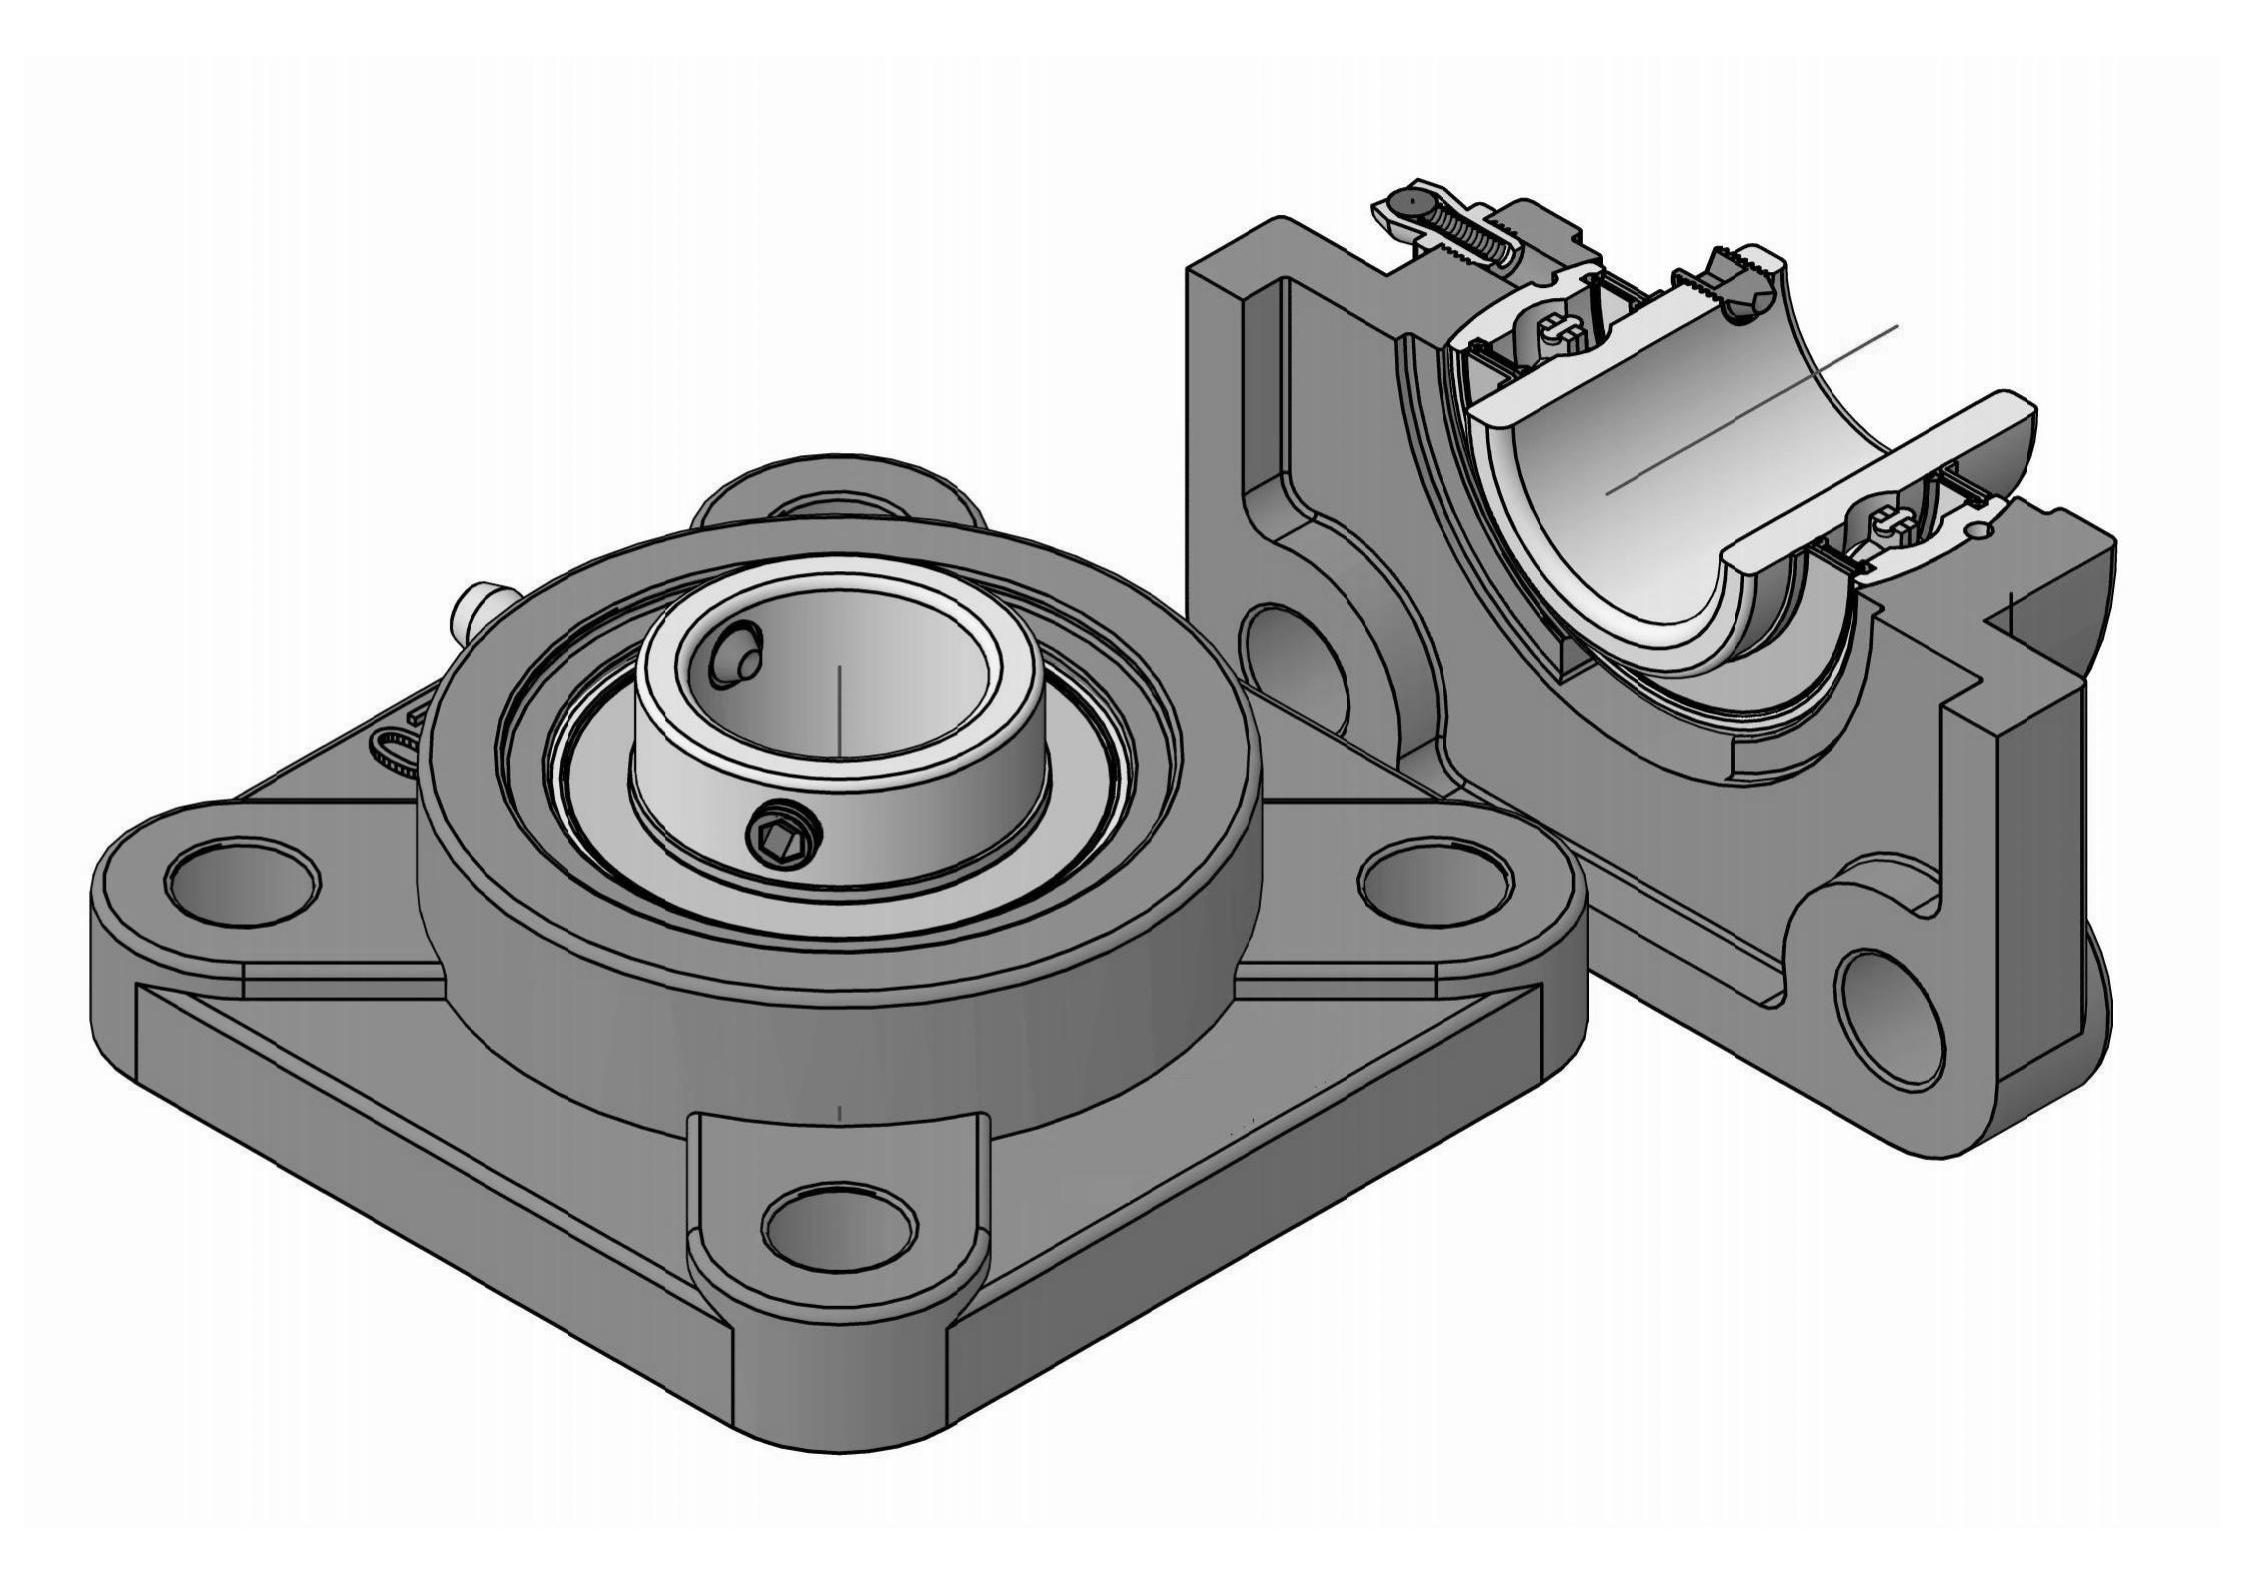 UCFS310-30 four Bolt Square flange bearing units with 1-7/8 inch bore